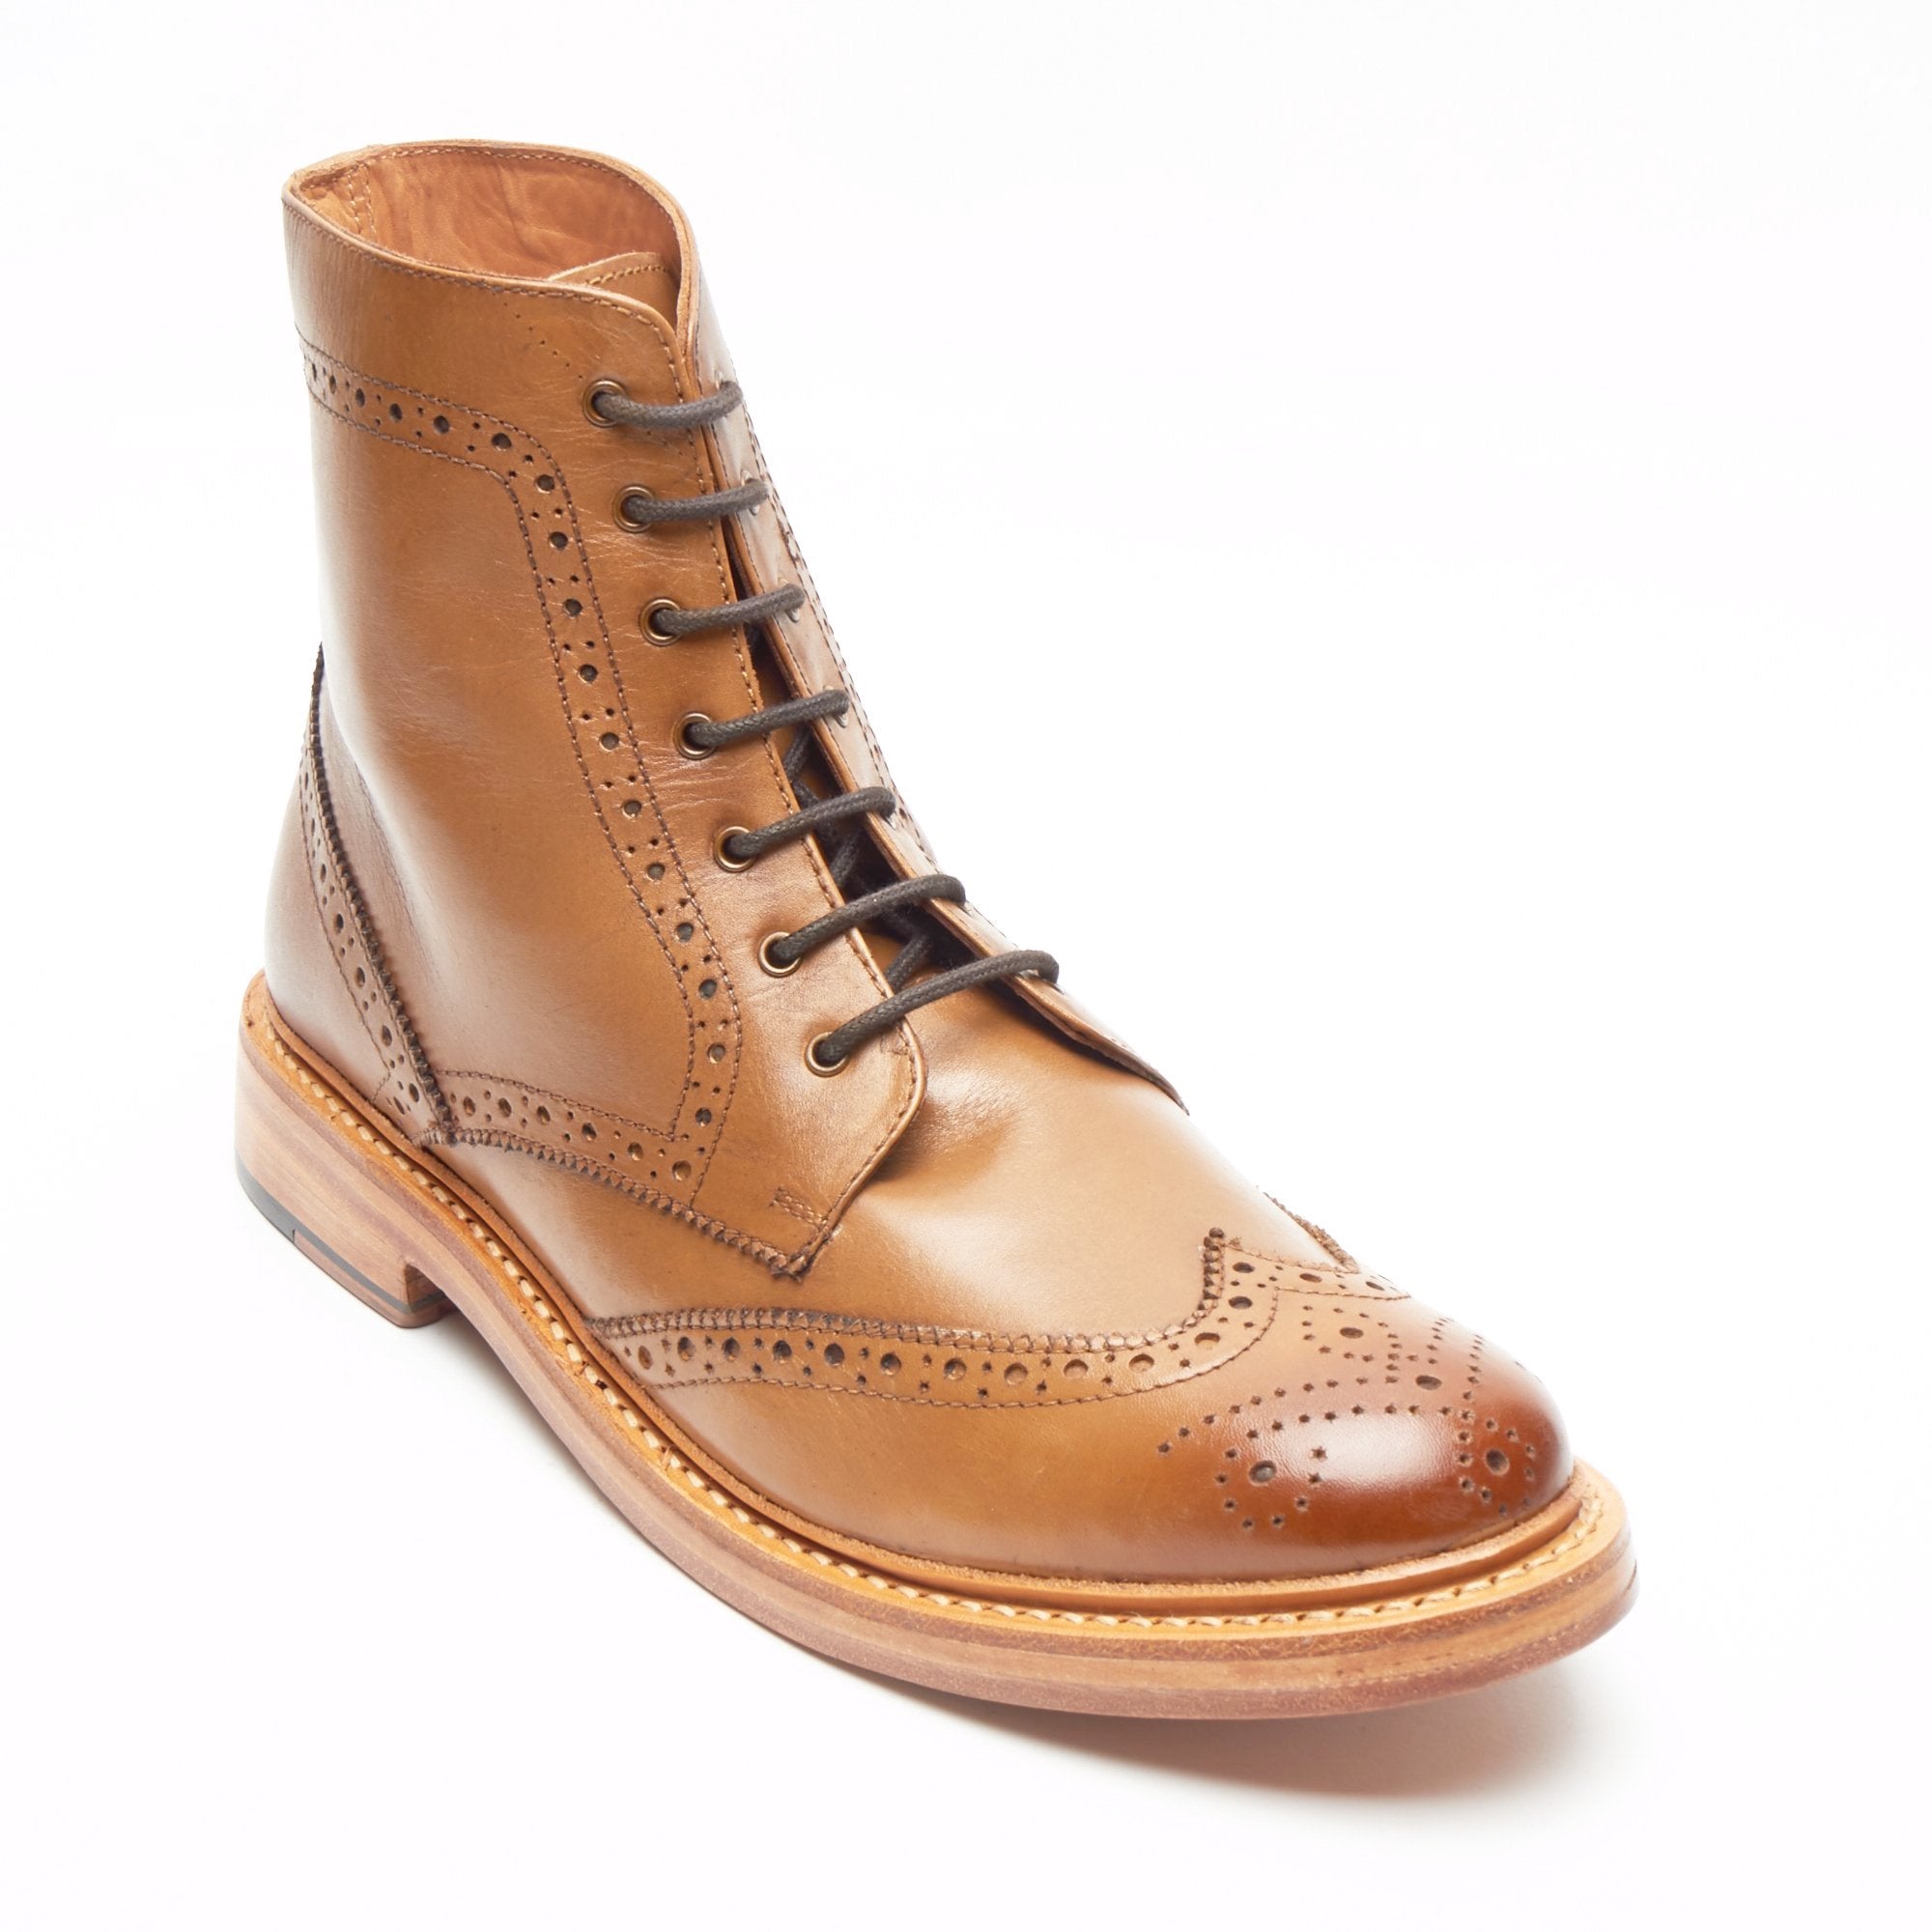 Mens Leather Goodyear Welted Lace Up Boots - 17939 Tan